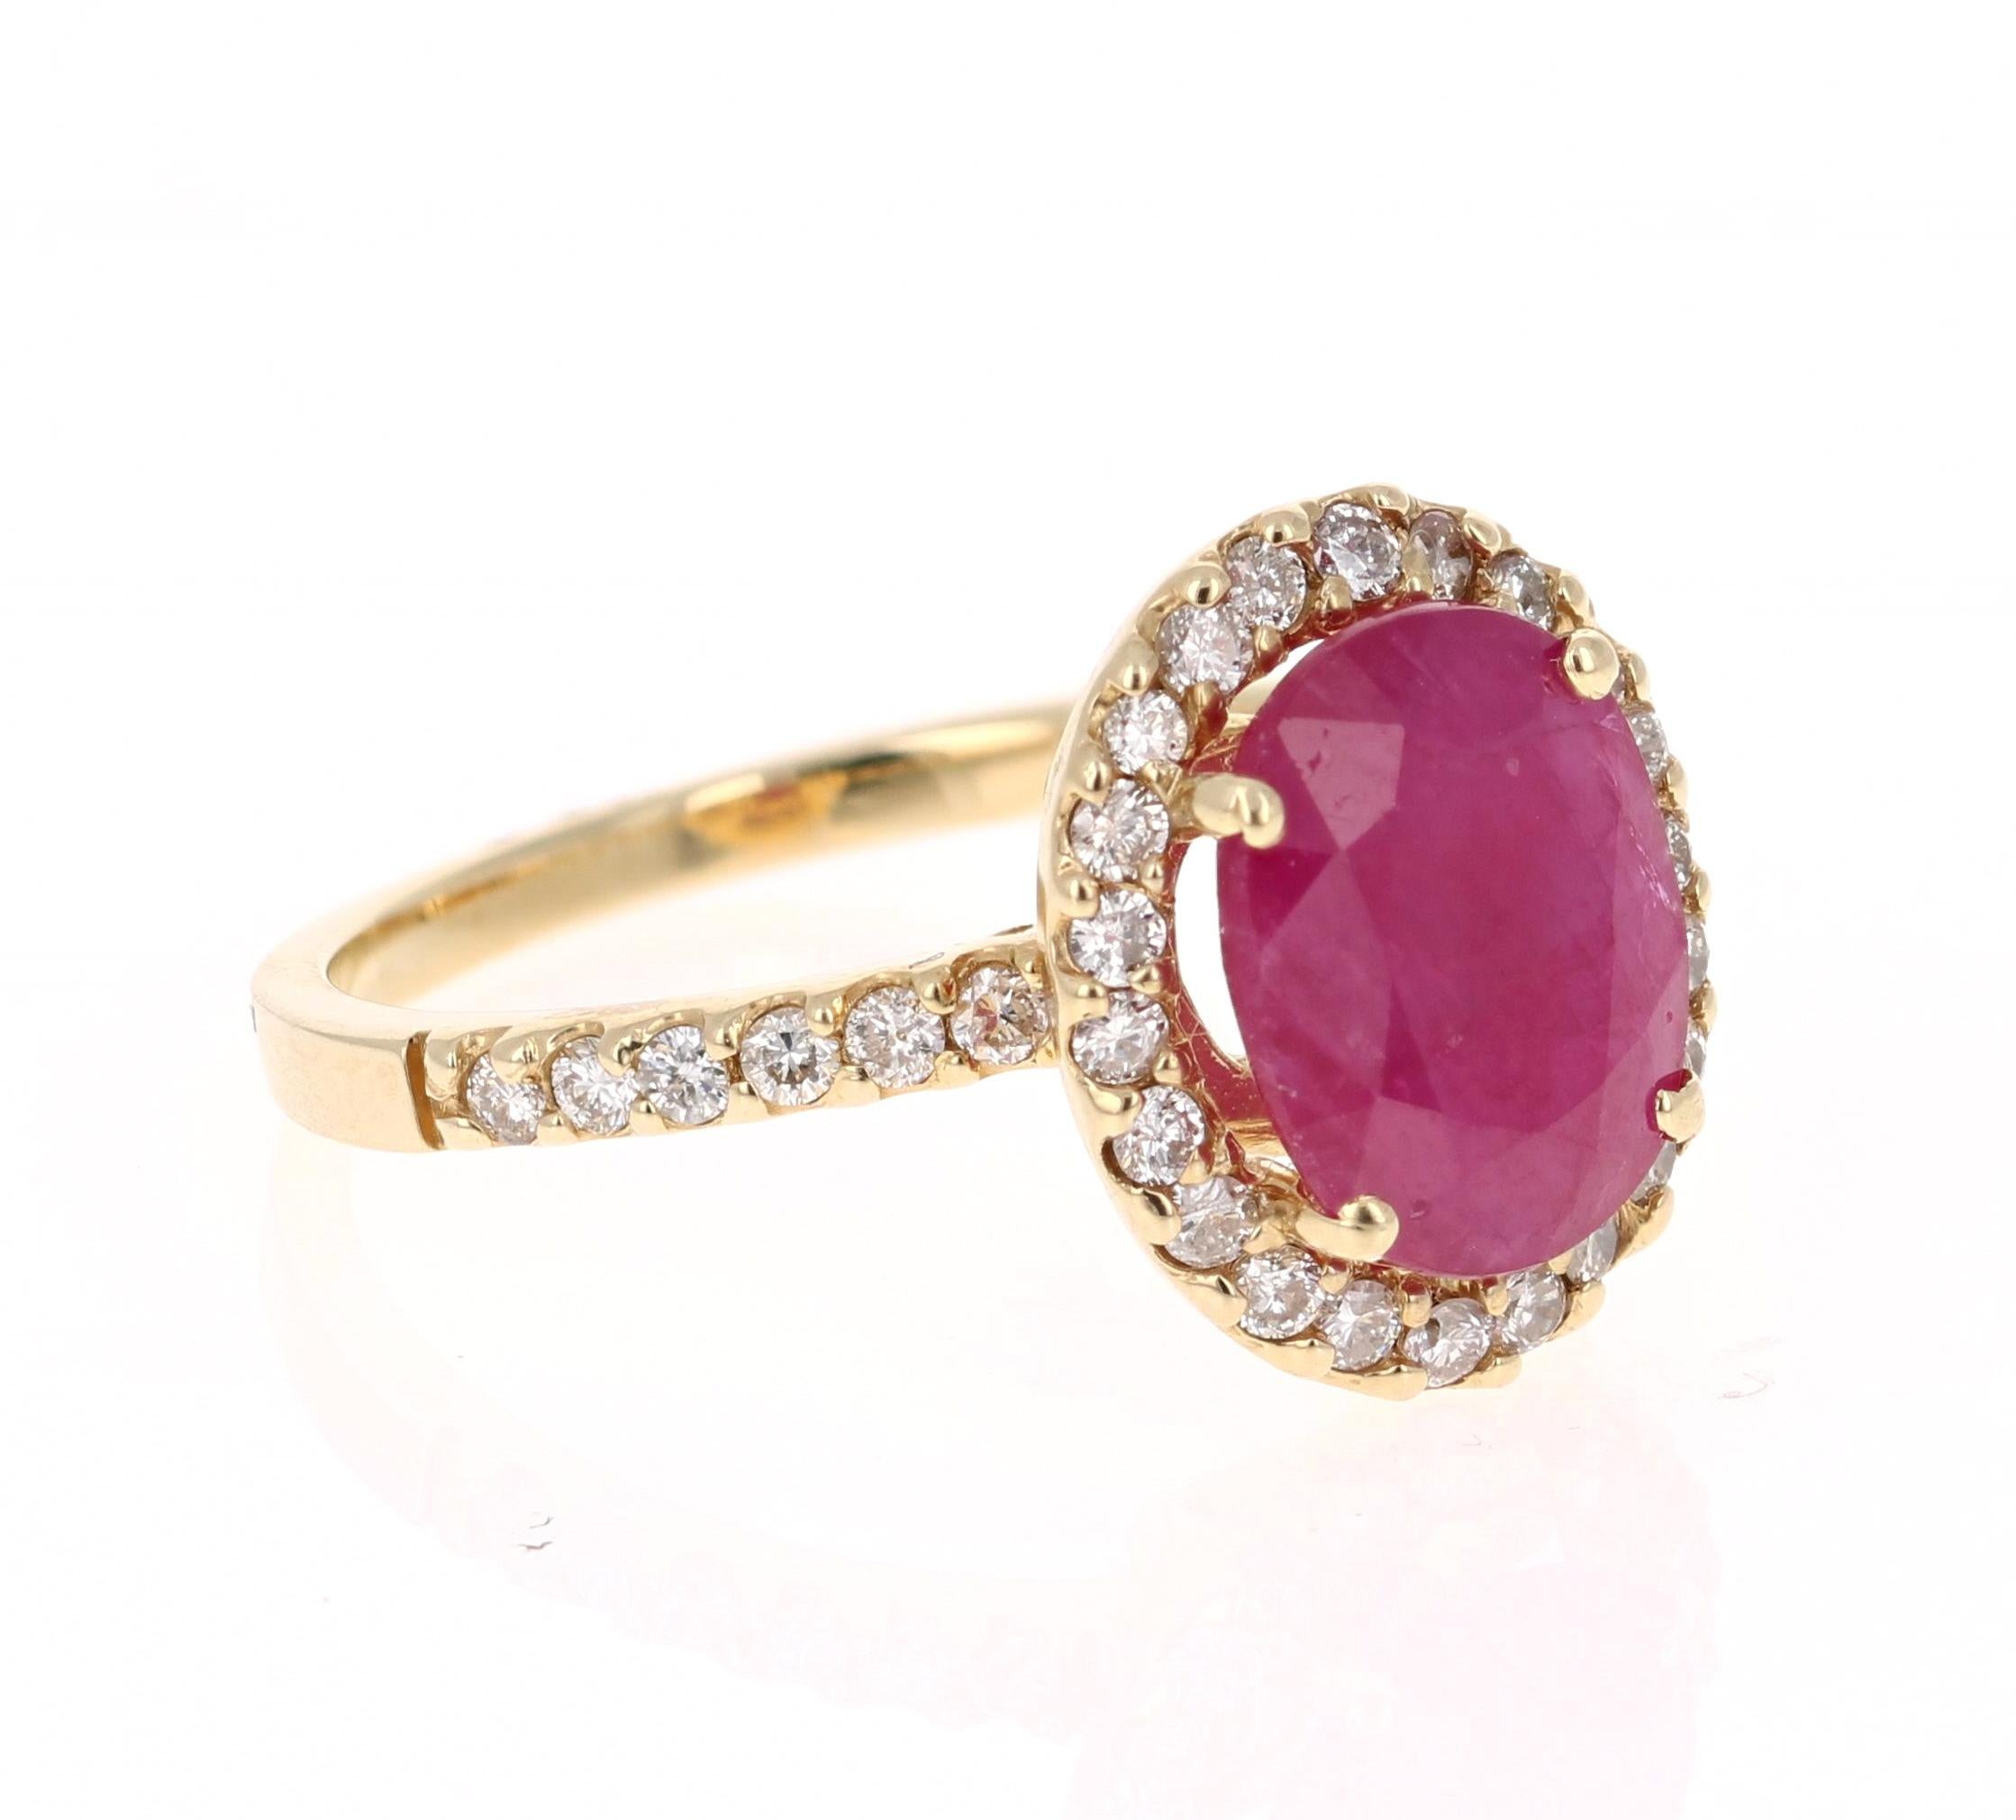 Simply beautiful Ruby Diamond Ring with a Oval Cut 2.59 Carat Ruby which is surrounded by 34 Round Cut Diamonds that weigh 0.45 carats. The total carat weight of the ring is 3.04 carats. The clarity and color of the diamonds are VS-H.

The ring is